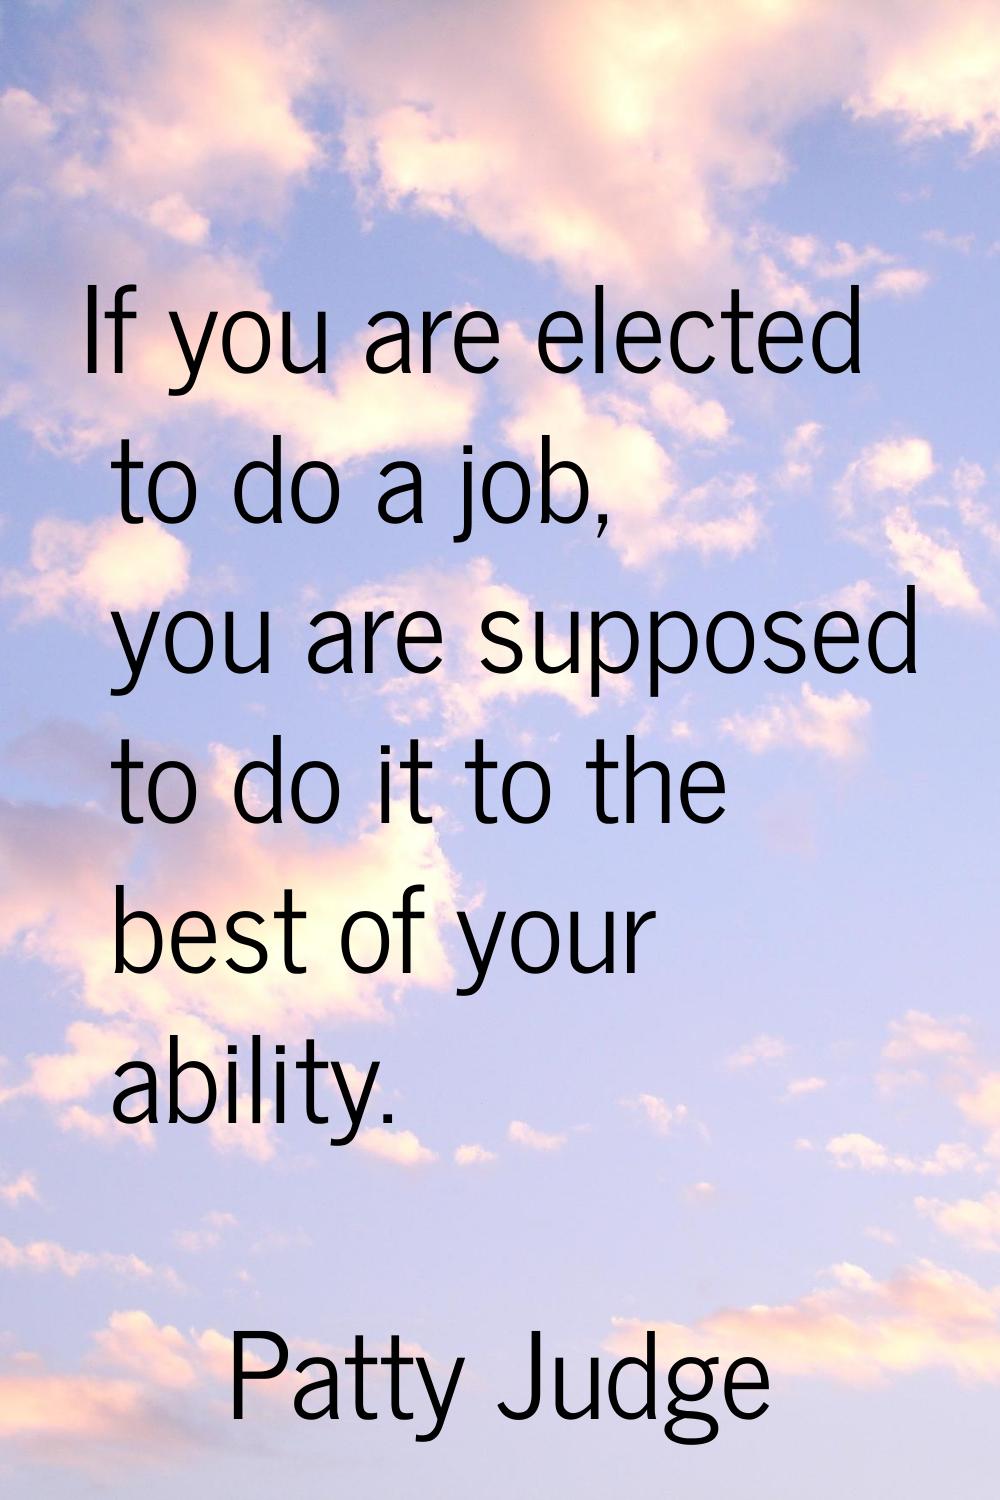 If you are elected to do a job, you are supposed to do it to the best of your ability.